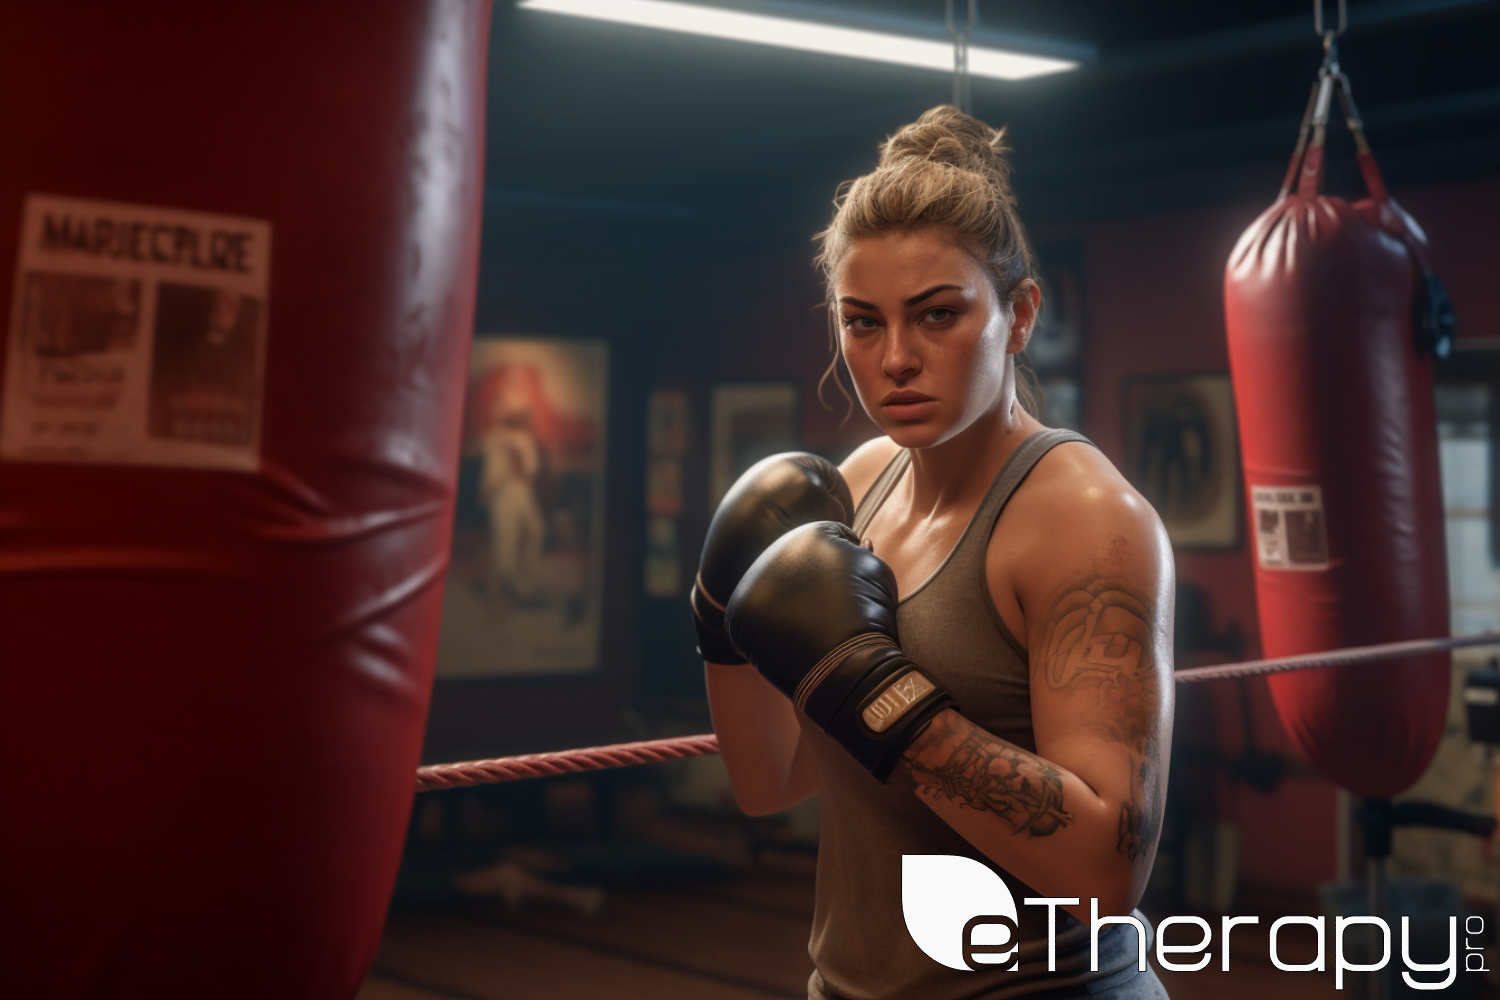 A slightly overweight woman in a boxing gym - Do I have anger issues